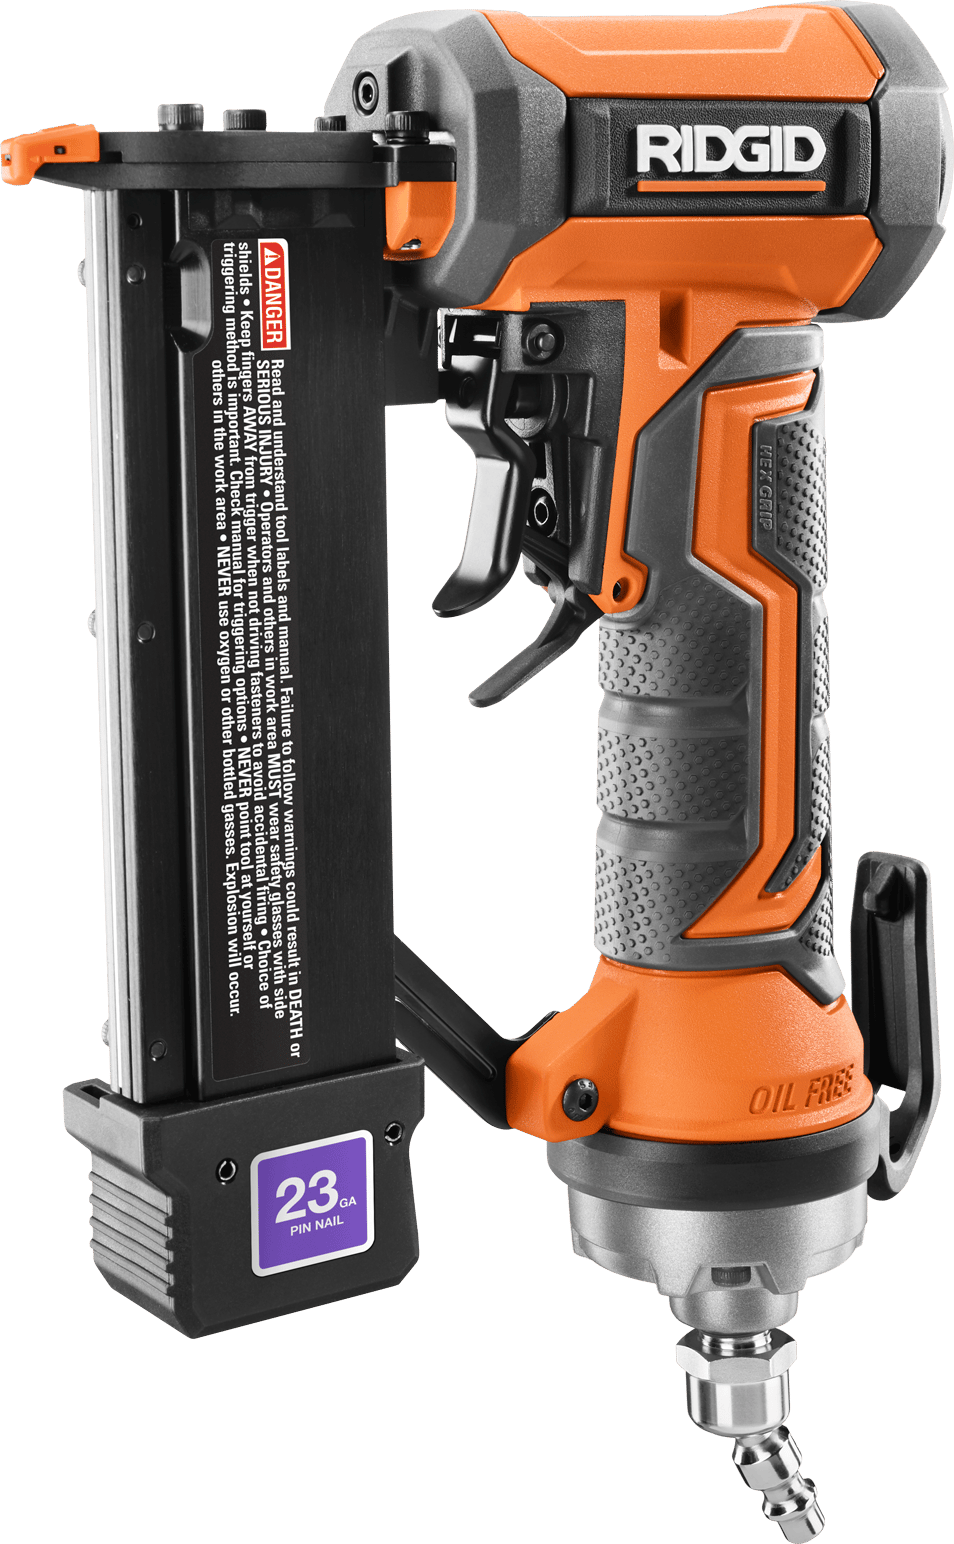 Handheld power drill, Impact wrench, Product